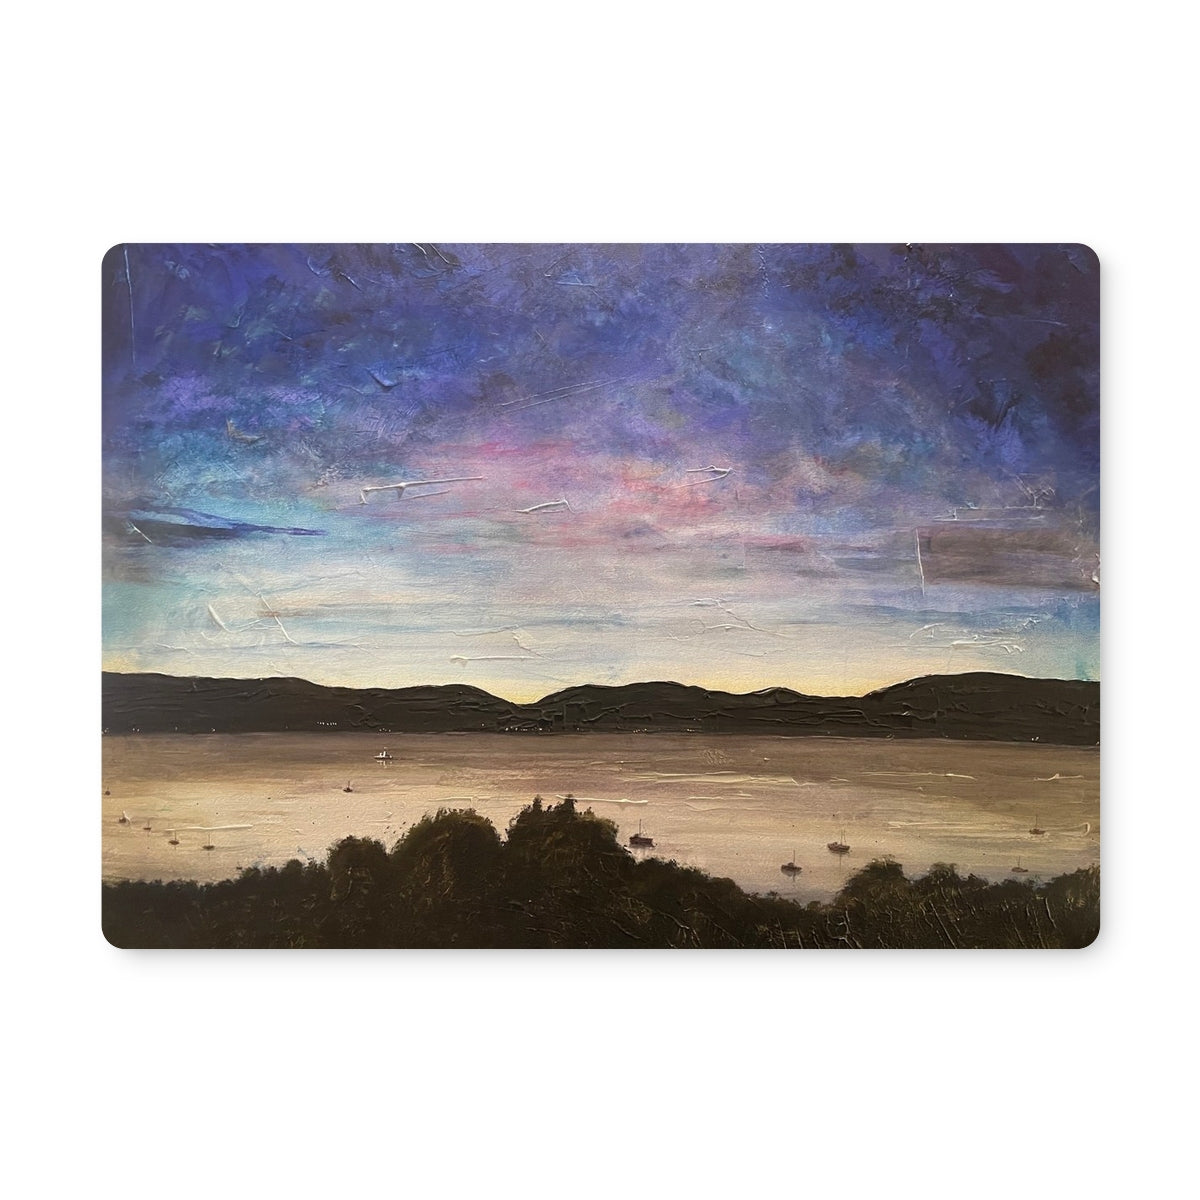 River Clyde Twilight Art Gifts Placemat-Placemats-River Clyde Art Gallery-Single Placemat-Paintings, Prints, Homeware, Art Gifts From Scotland By Scottish Artist Kevin Hunter